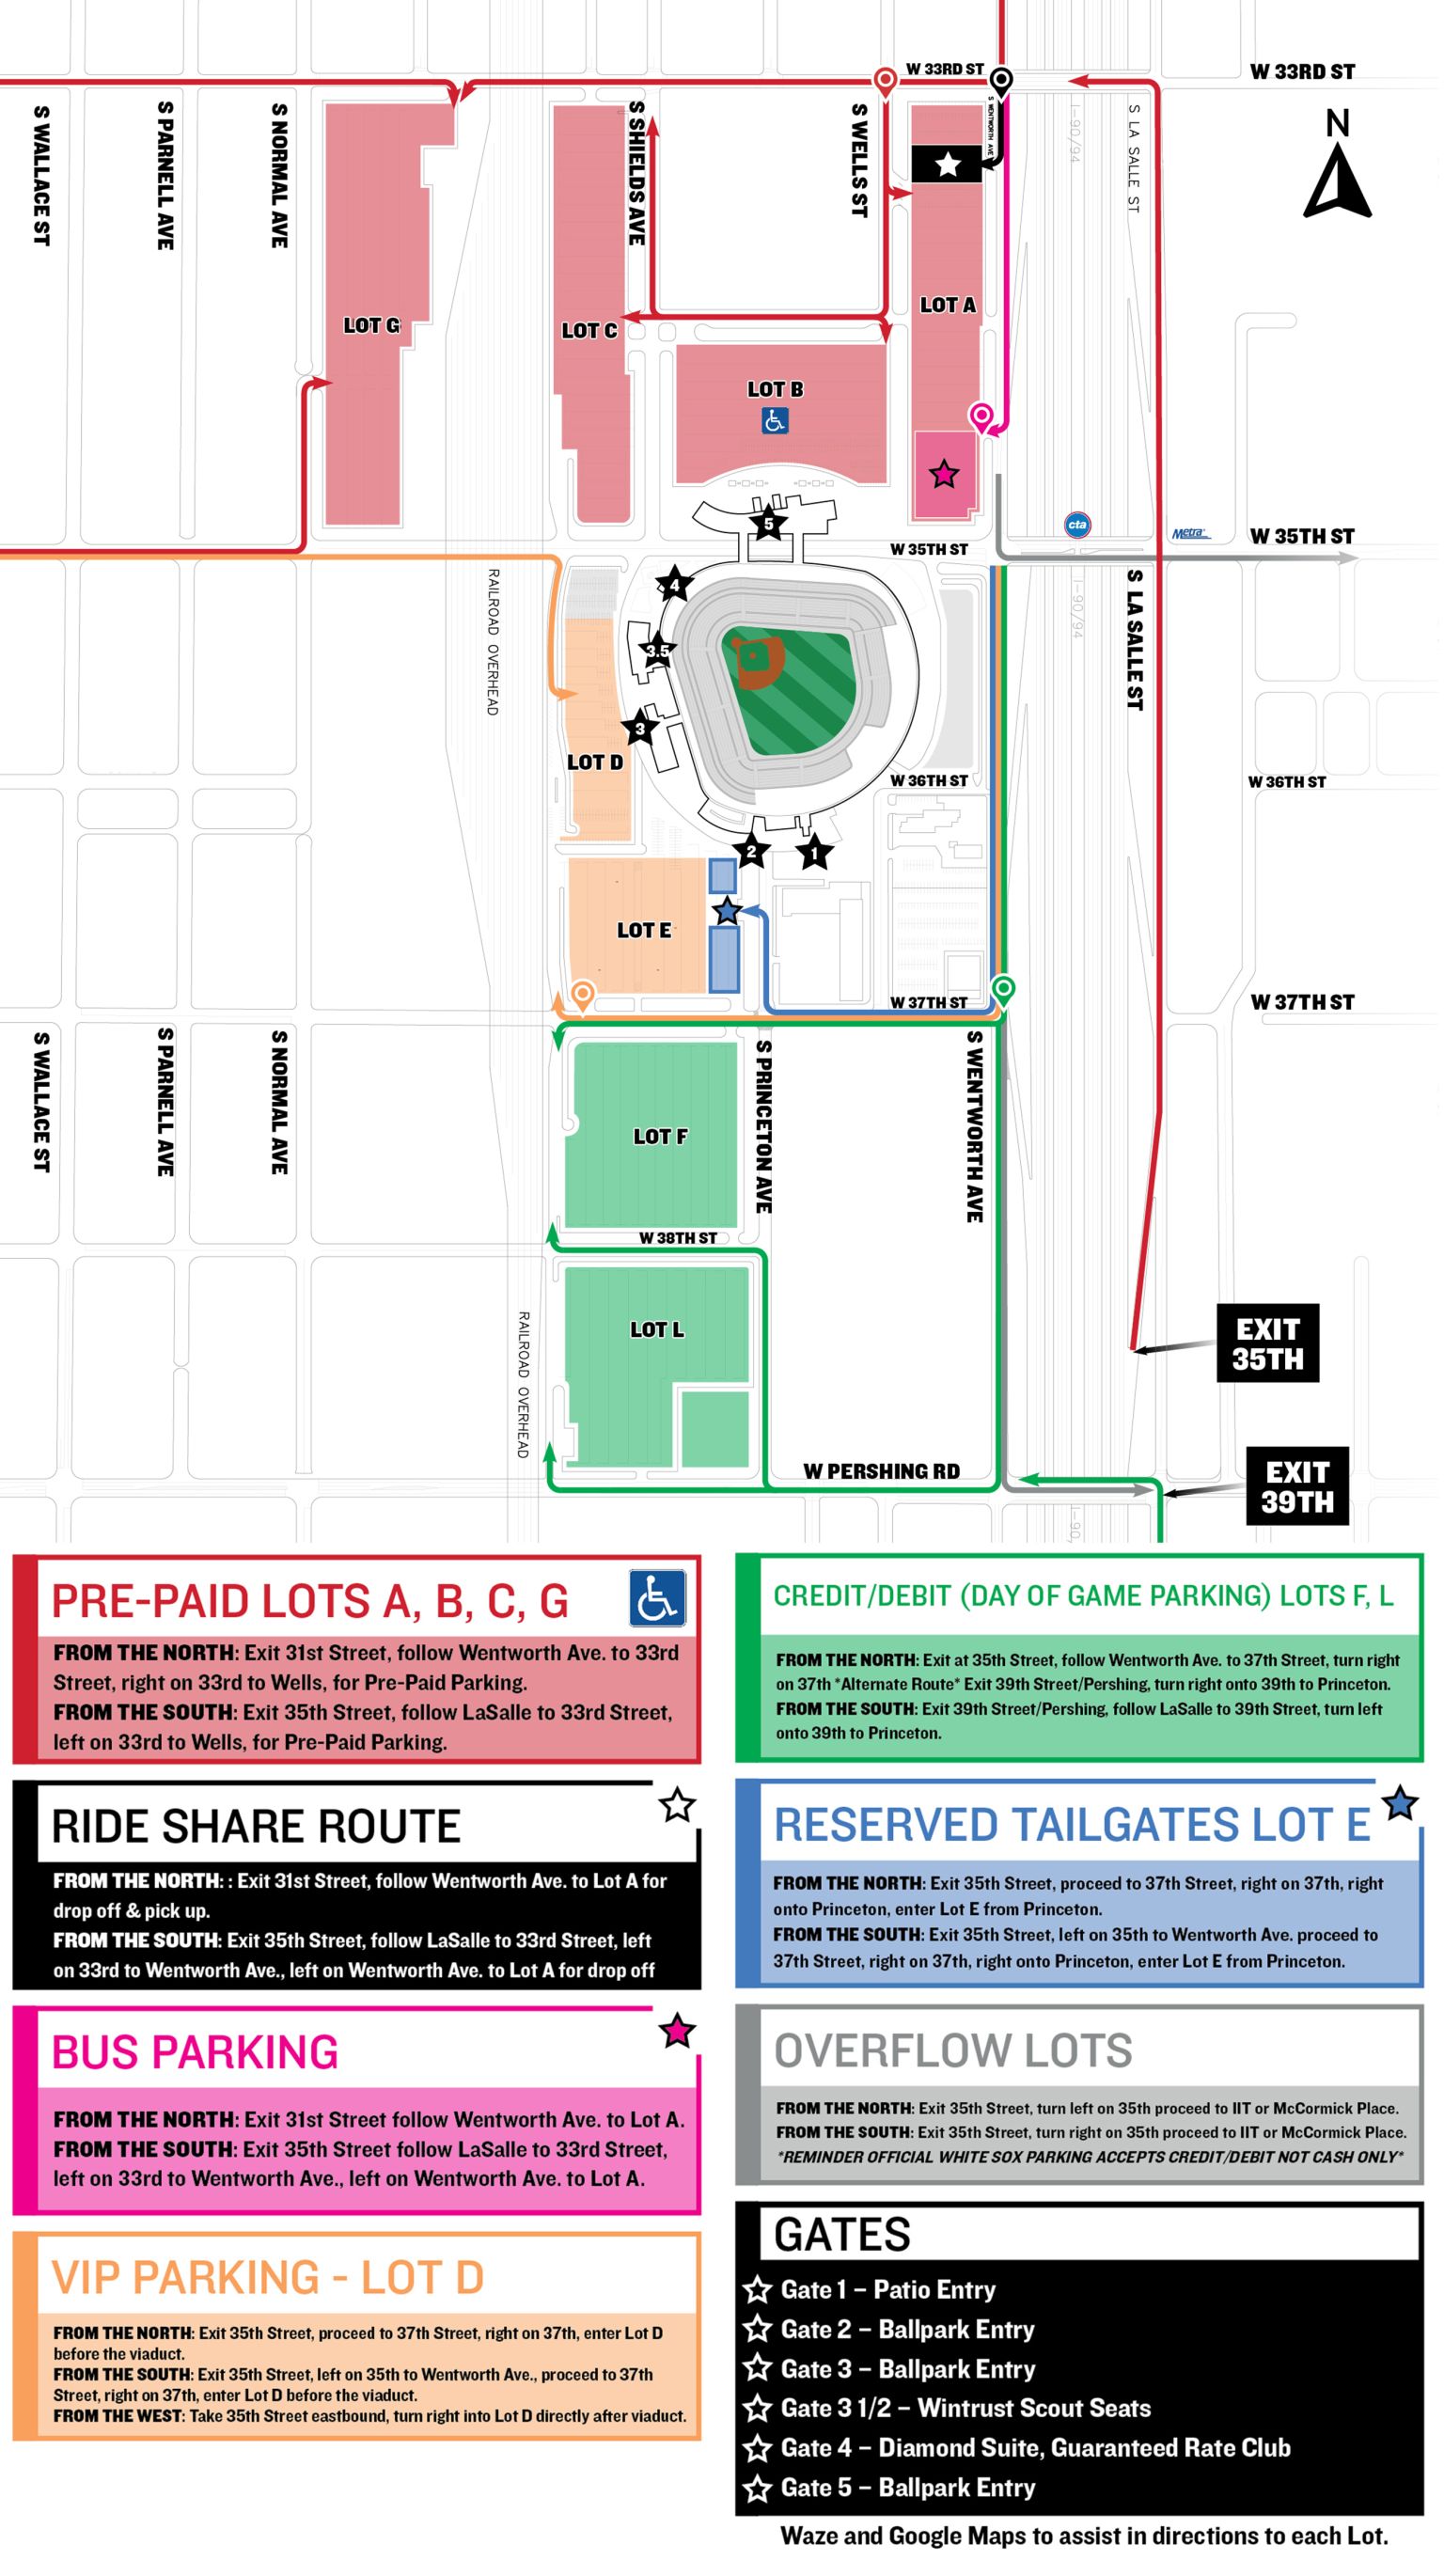 Permit-Parking Zone Near Sox Park Would Be Expanded Under Plan